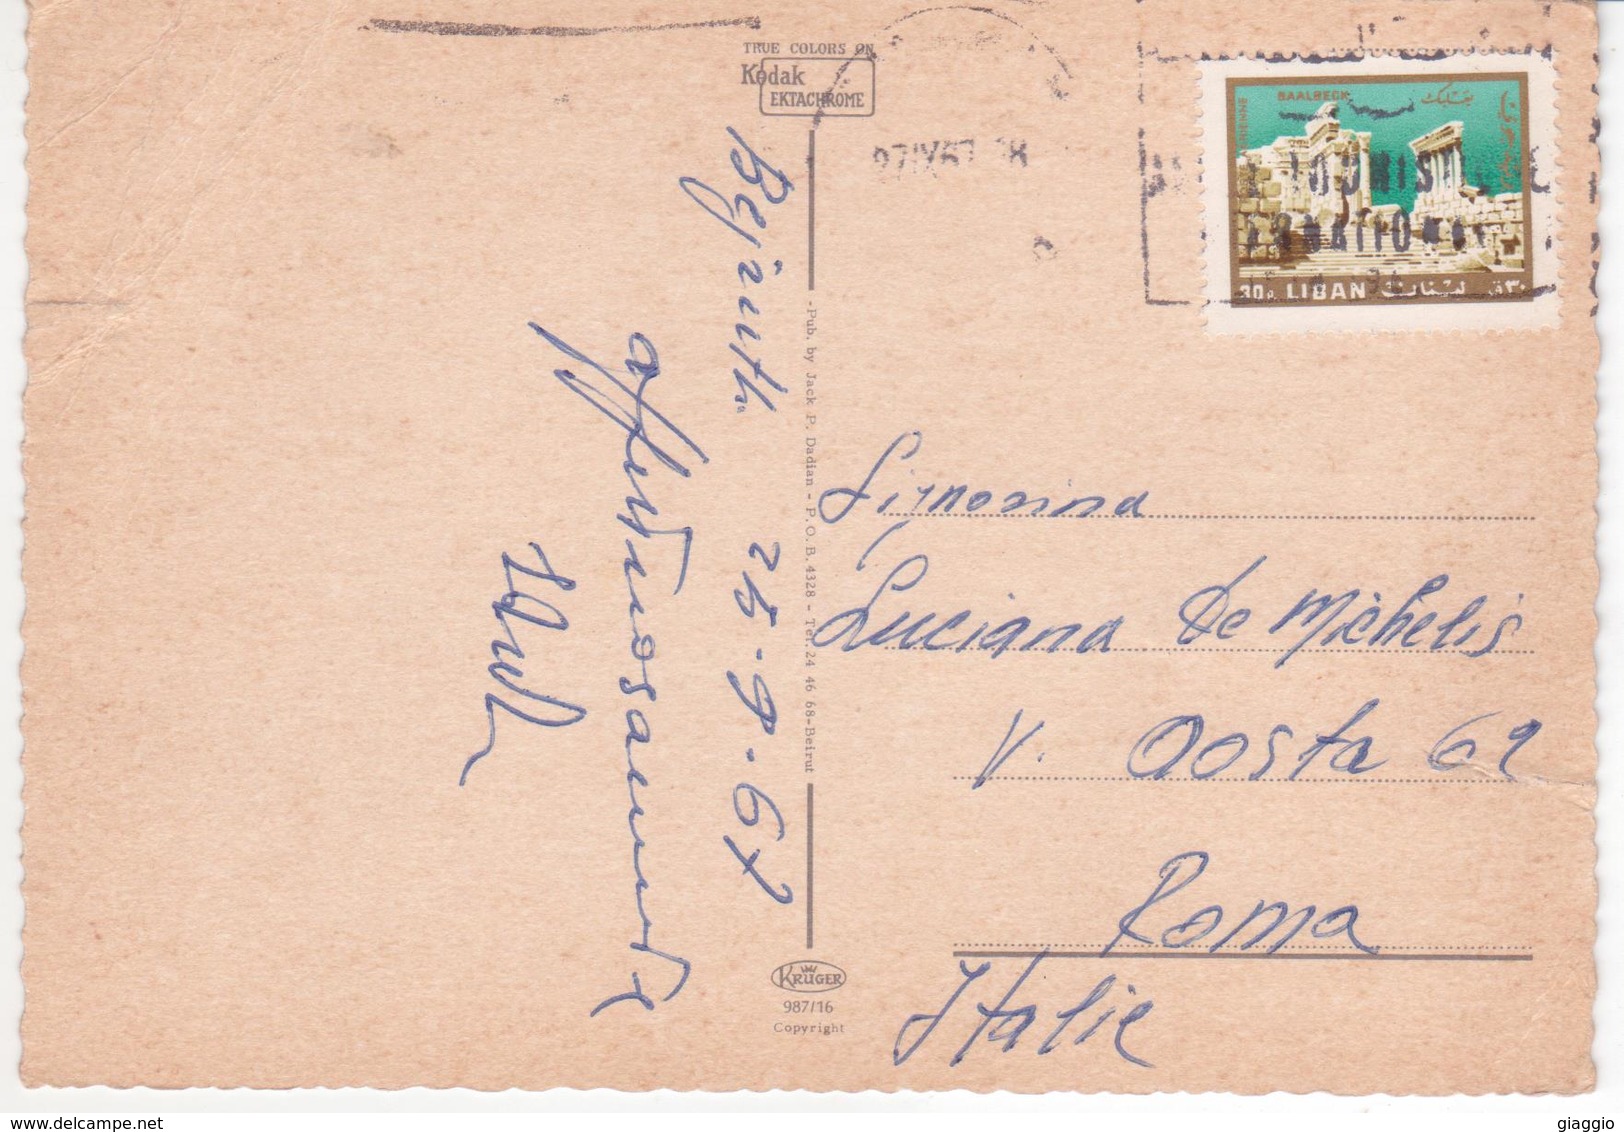 °°° 13505 - LIBAN - GREETINGS FROM BEIRUT - 1967 With Stamps °°° - Libano